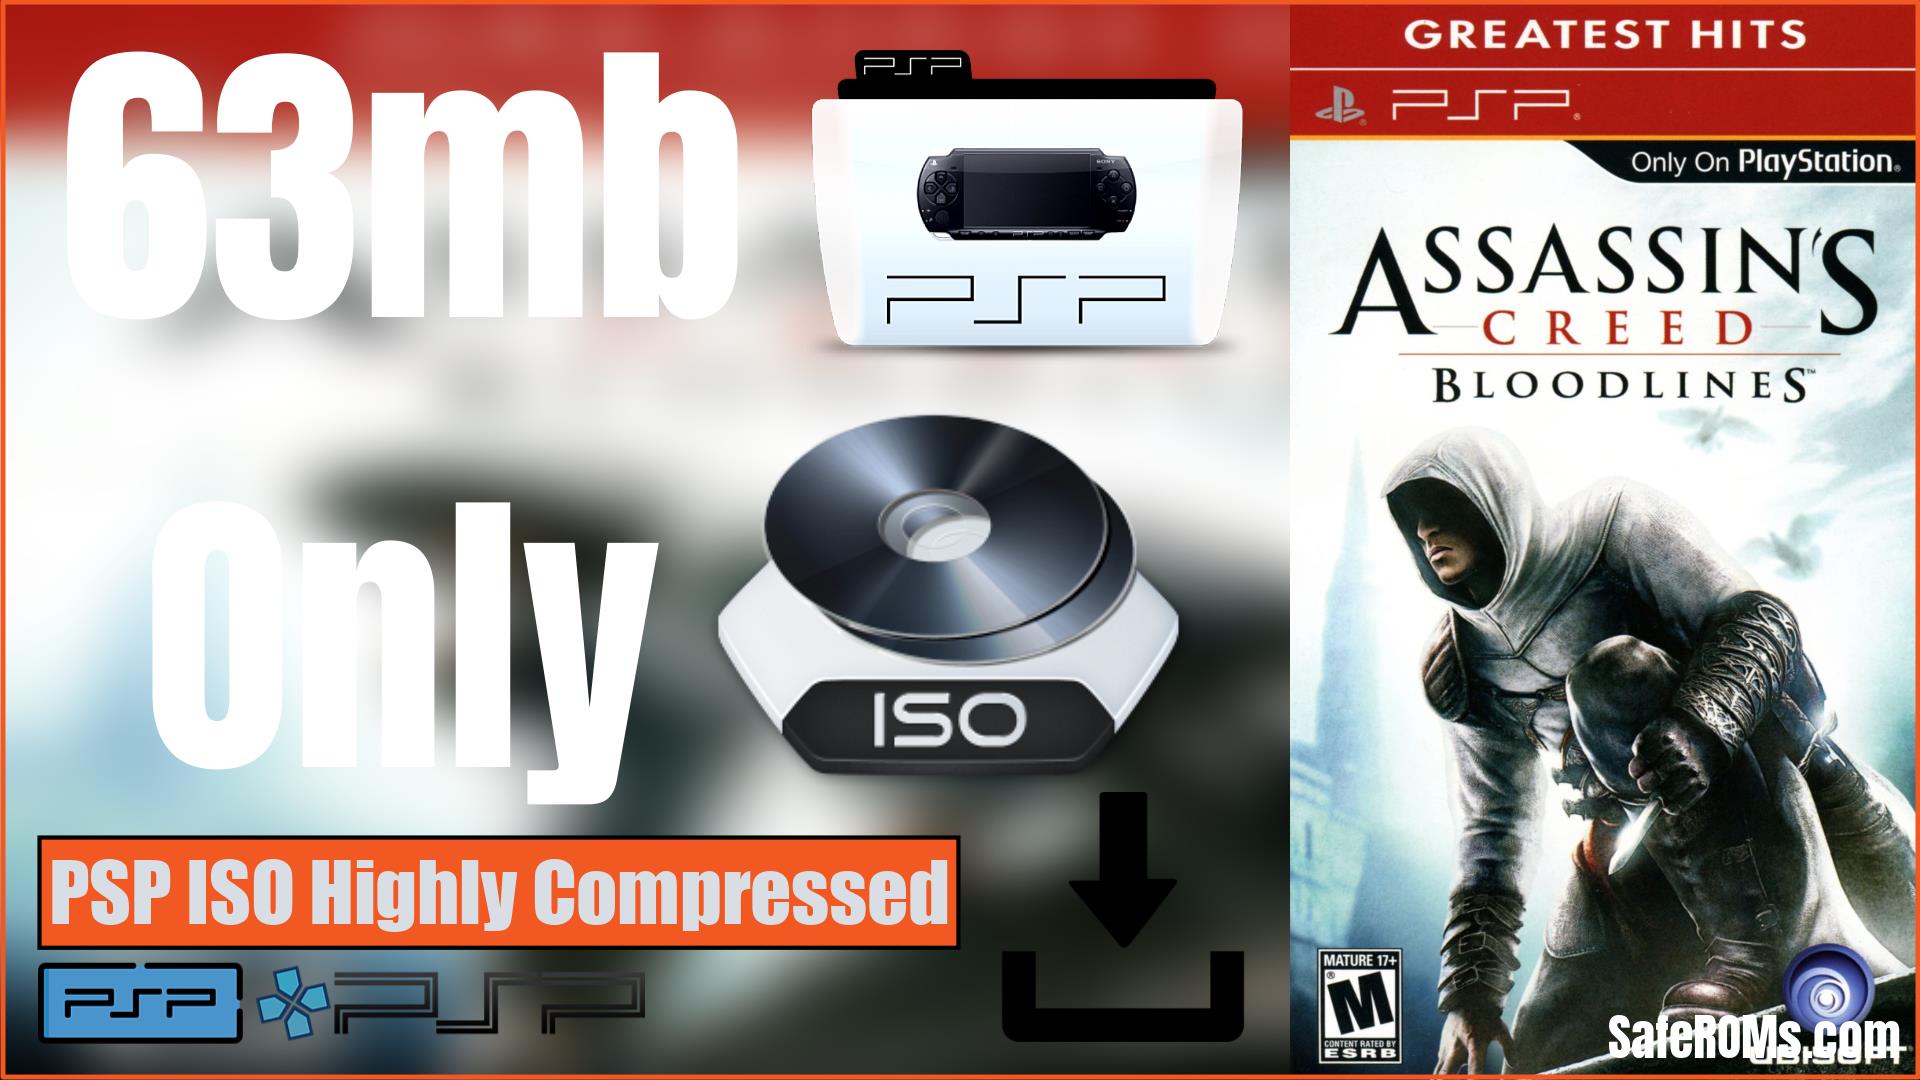 Assassin's Creed Bloodlines PSP ISO Highly Compressed